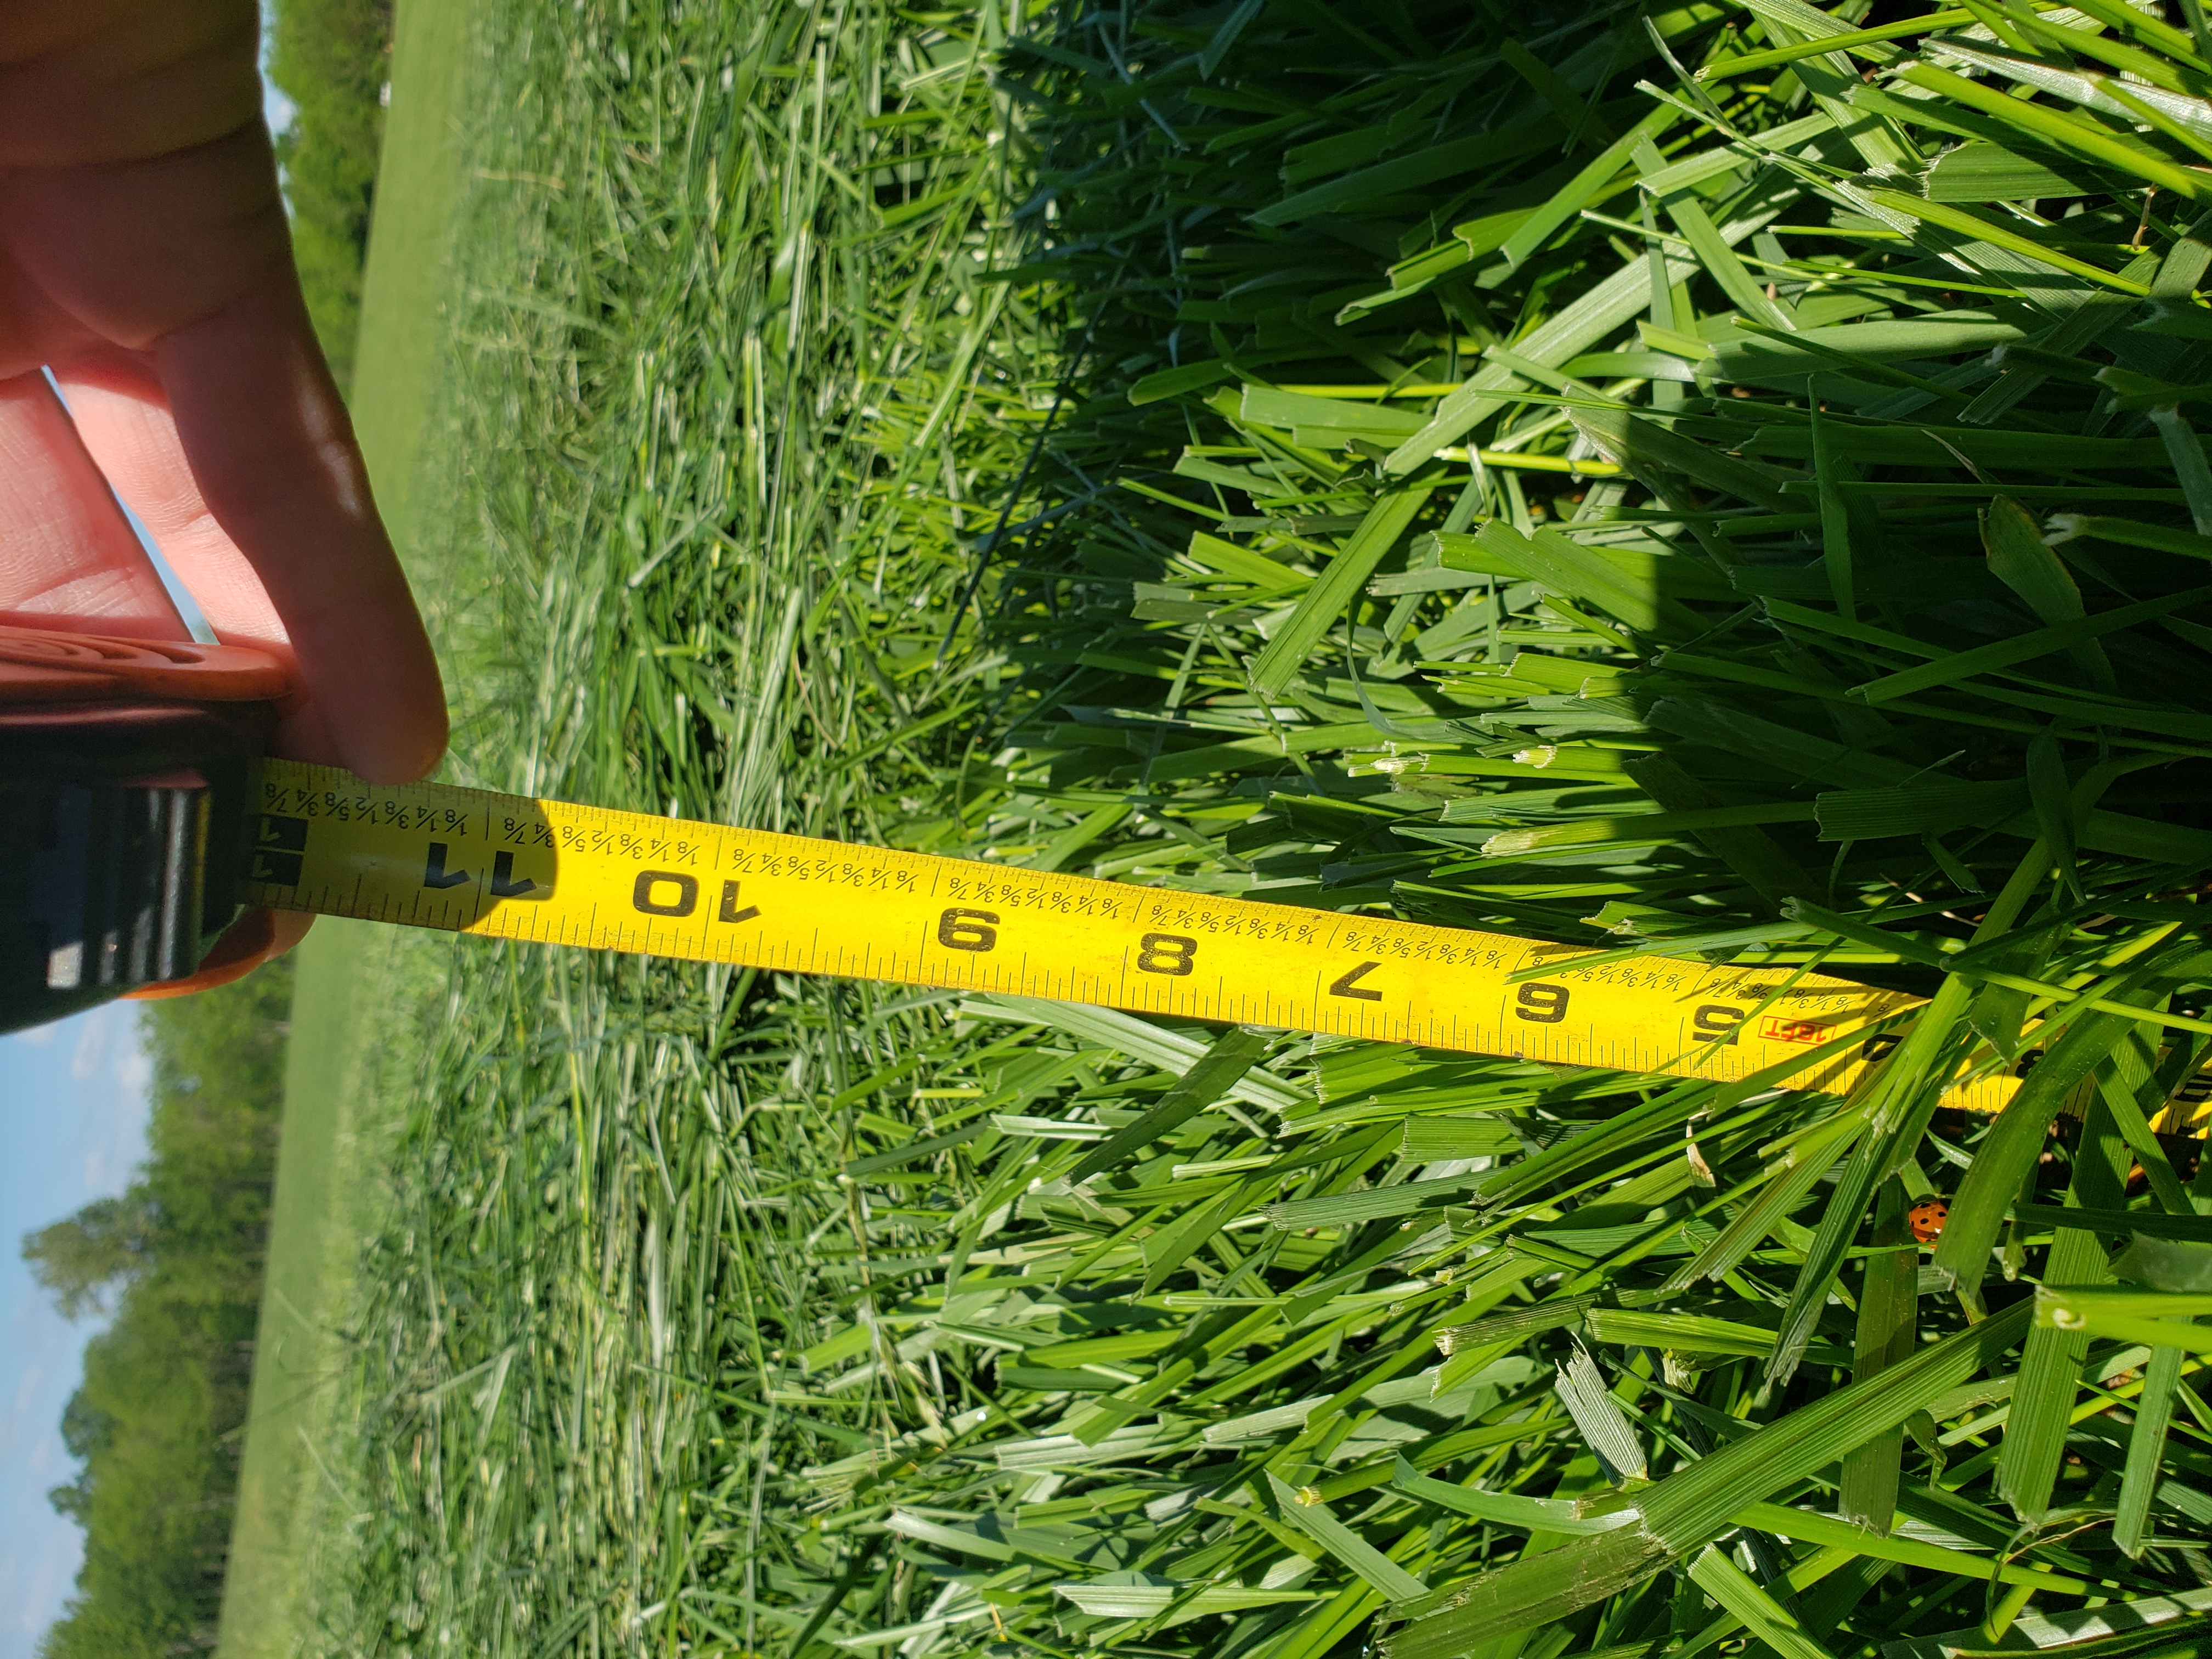 Yellow ruler in green hay field indicating grass is 6 inches tall.